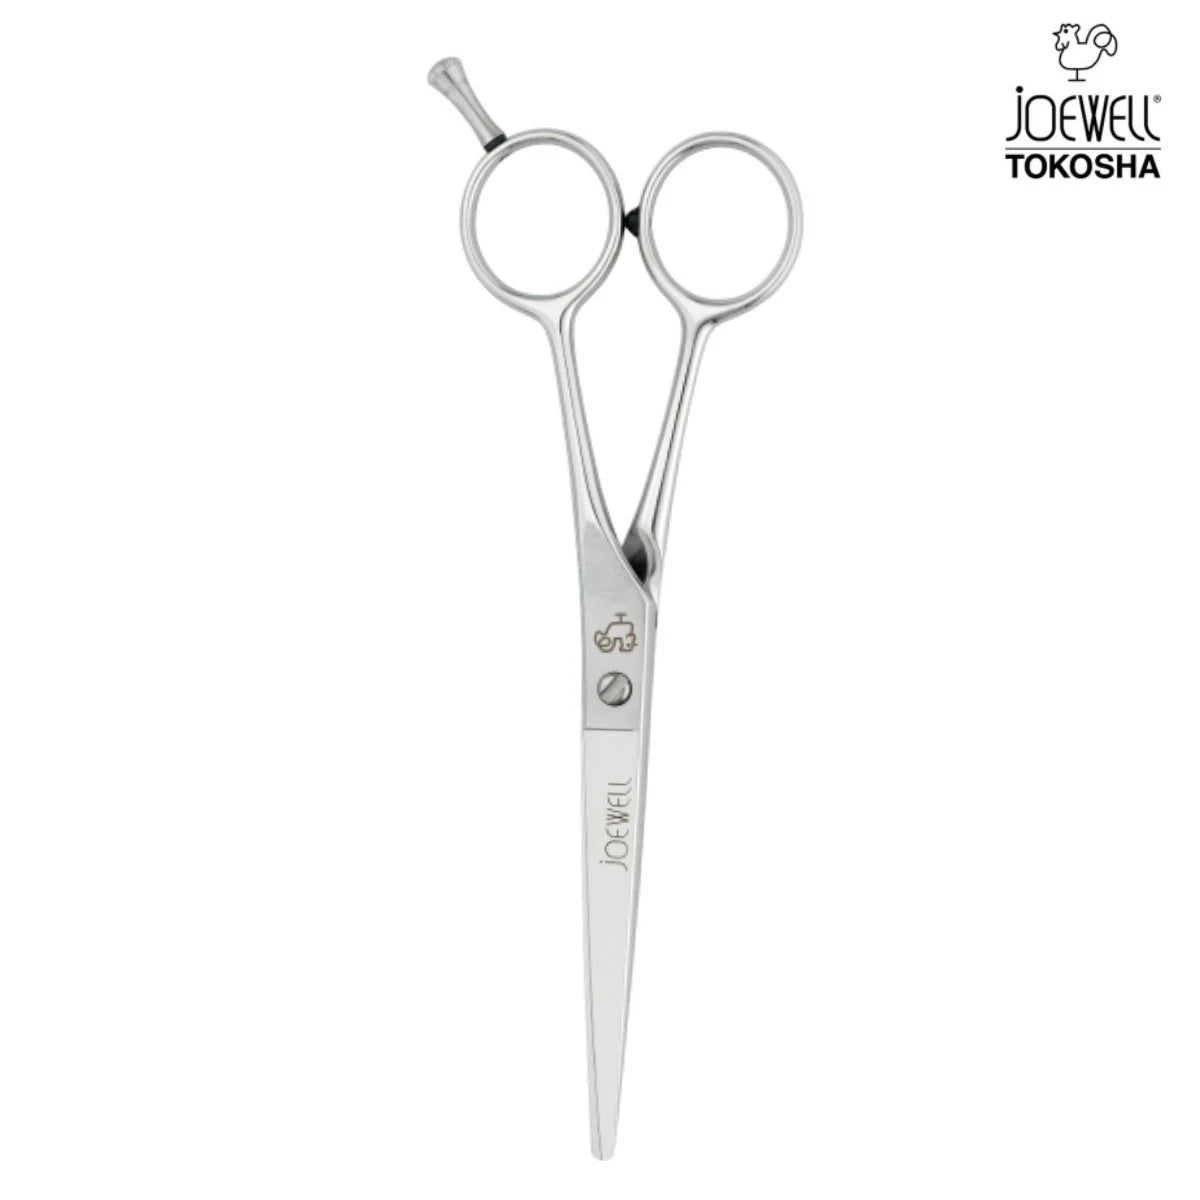 The Joewell Japanese Classic Apprentice Hairdressing Shear